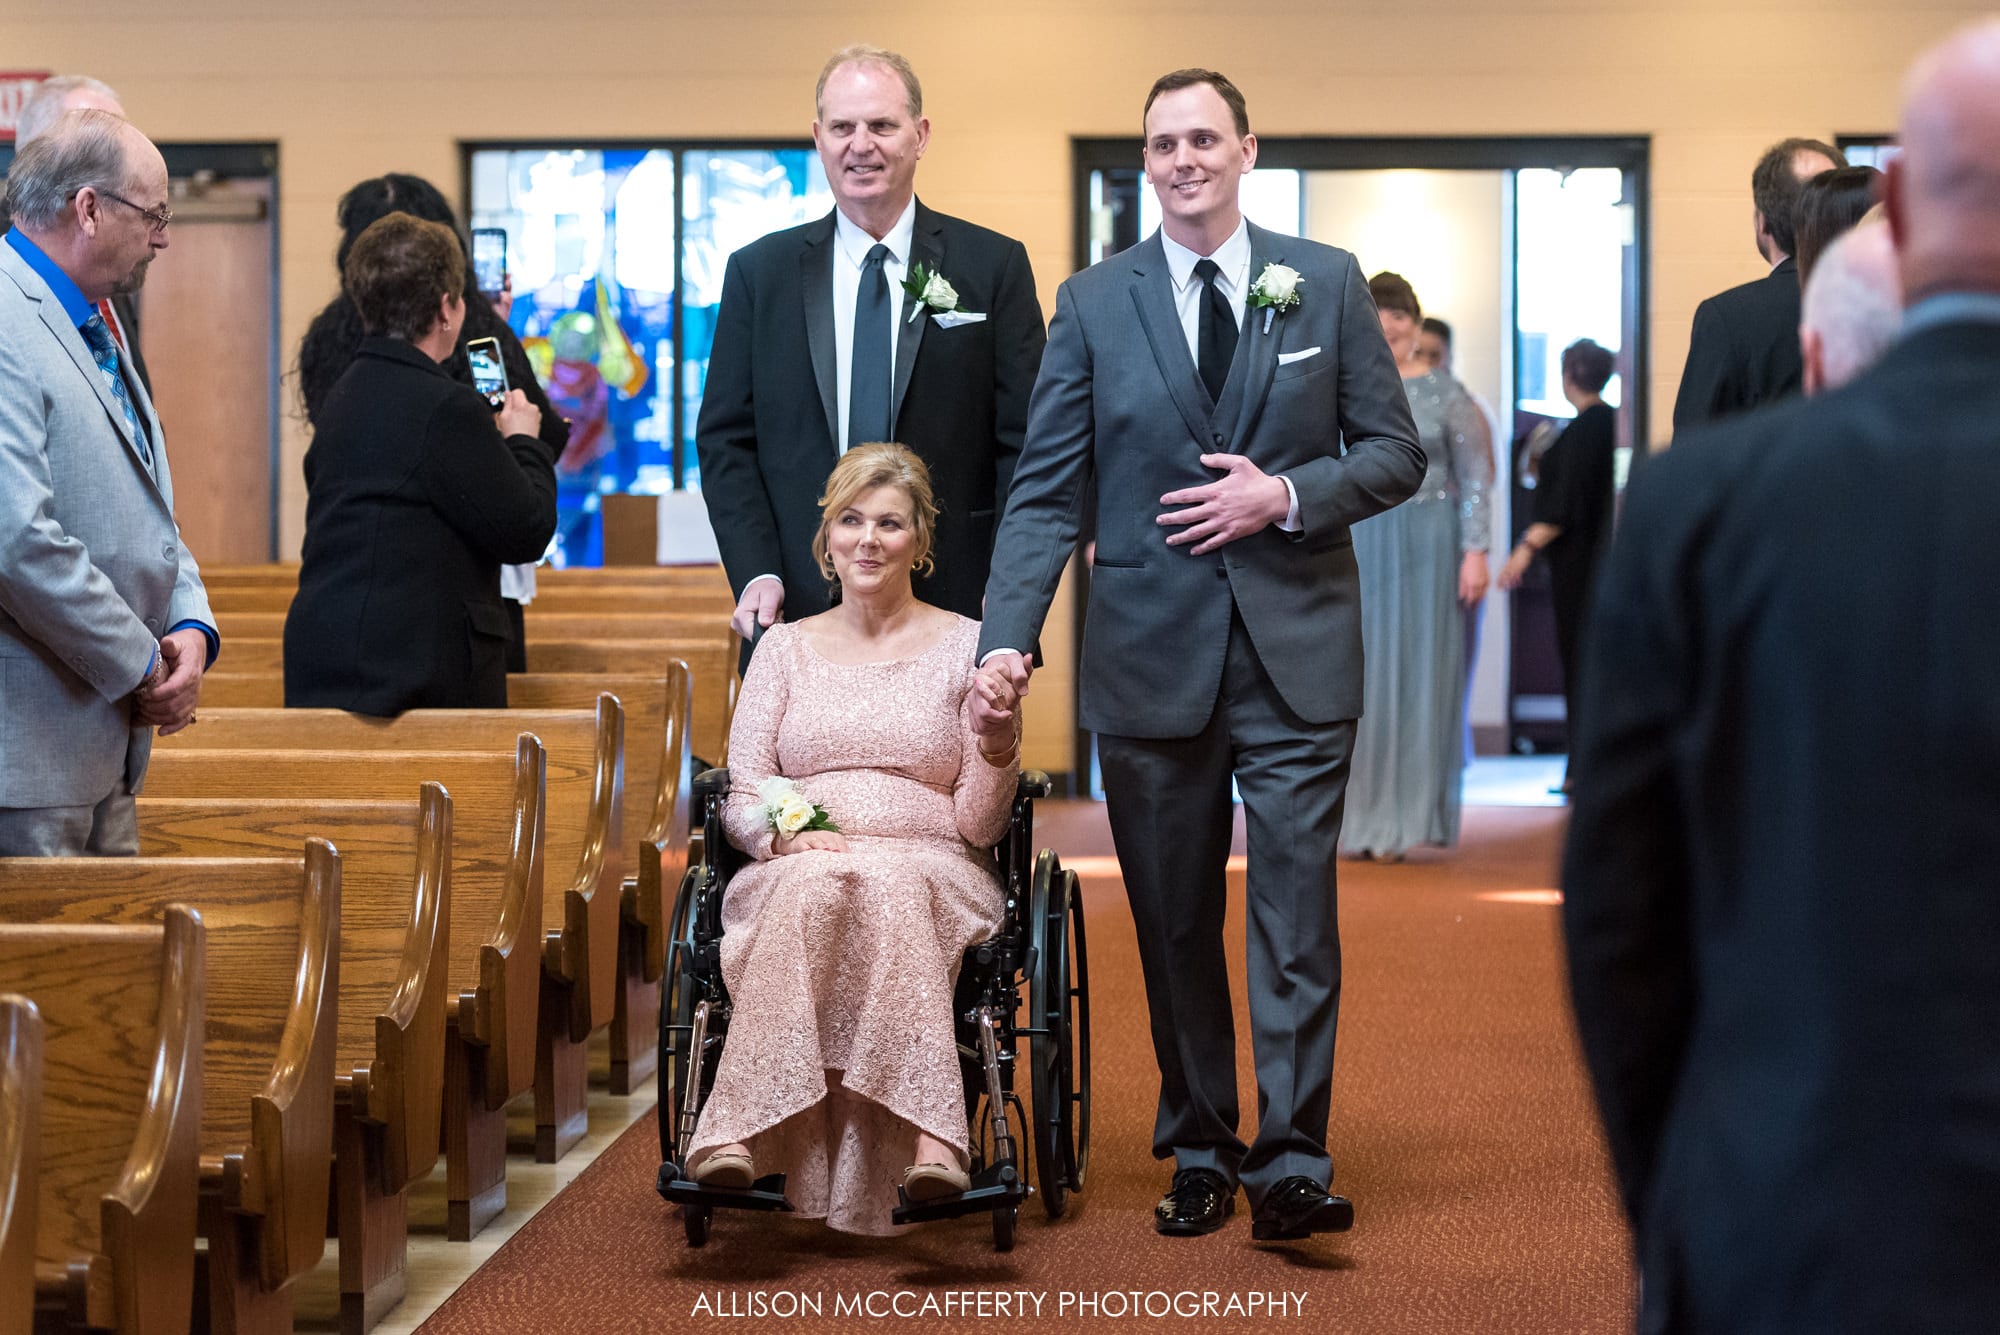 Groom and his Dad walking his Mom down the aisle for his wedding